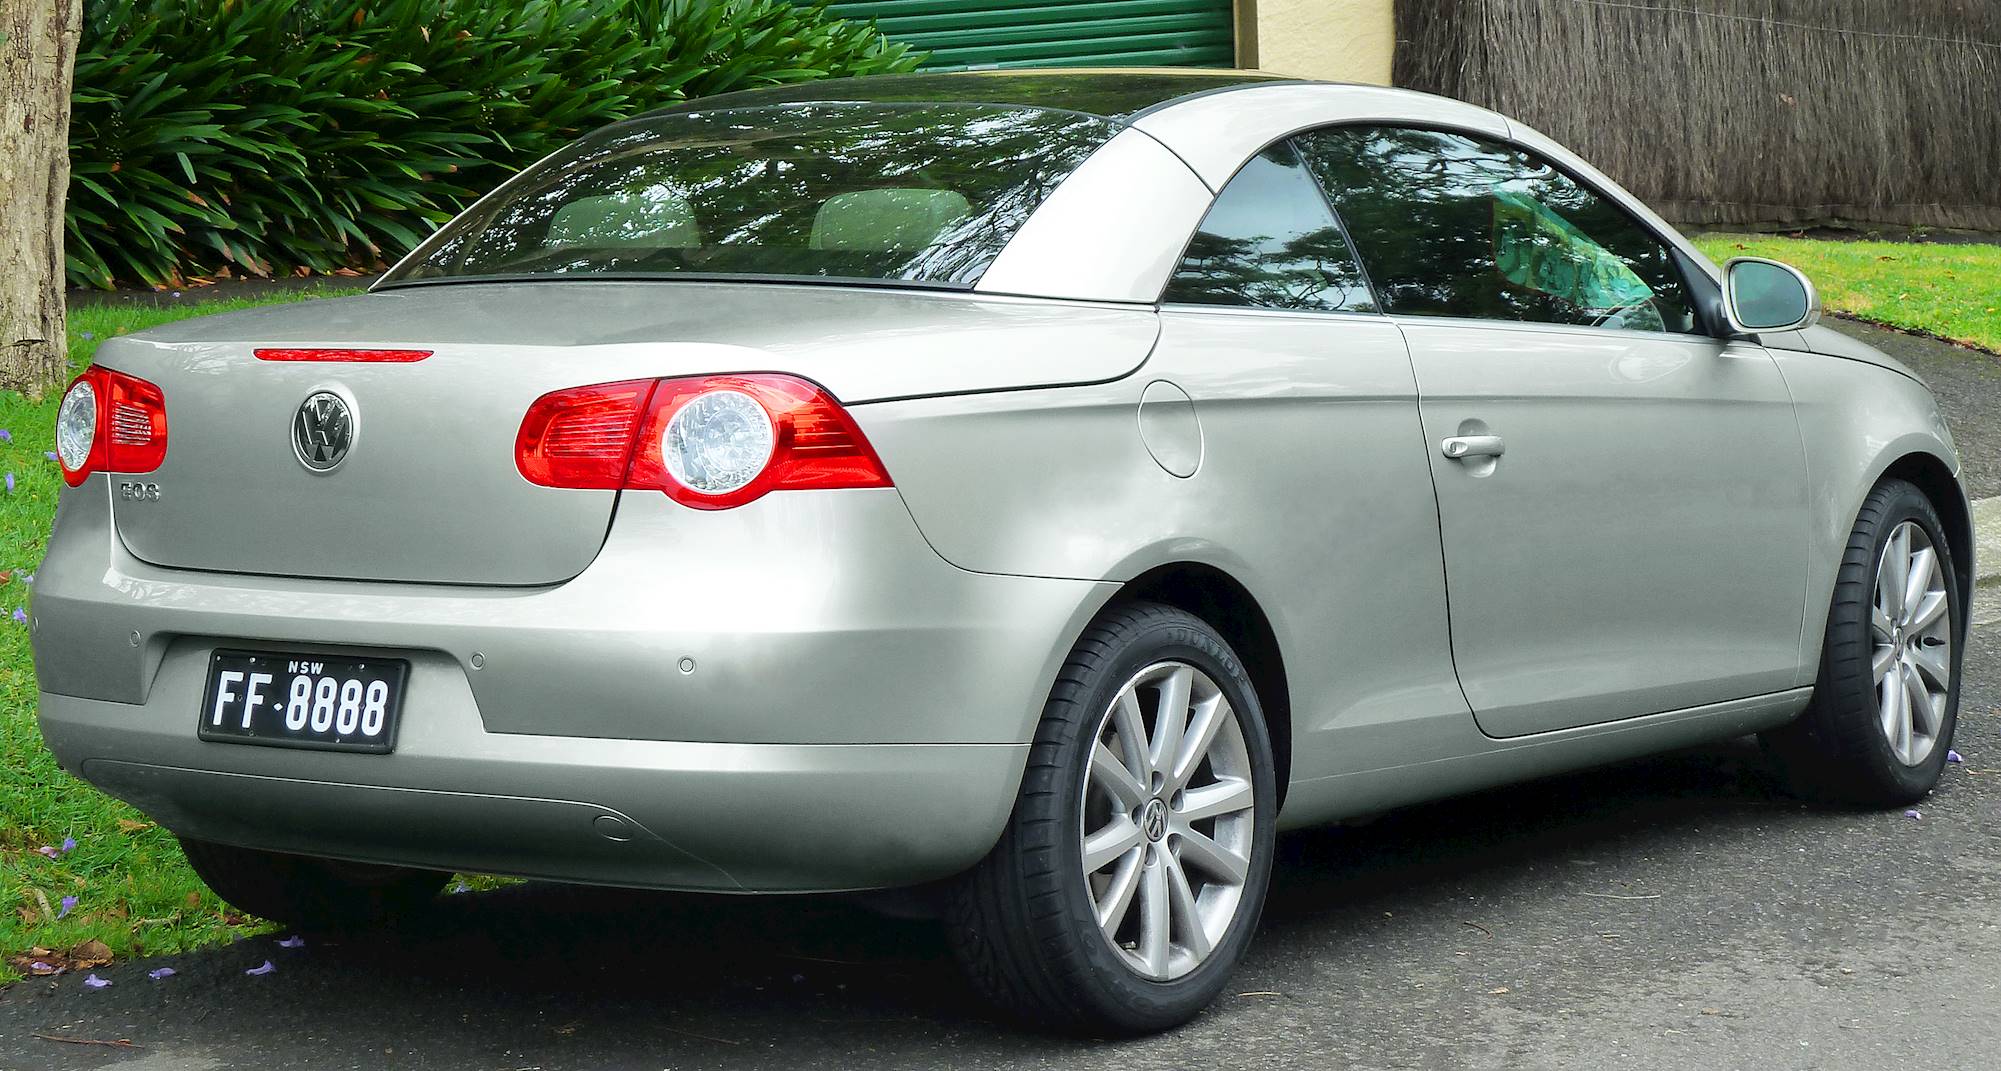 2008 Volkswagen Eos Lux - Convertible 2.0L Turbo Automated Manual